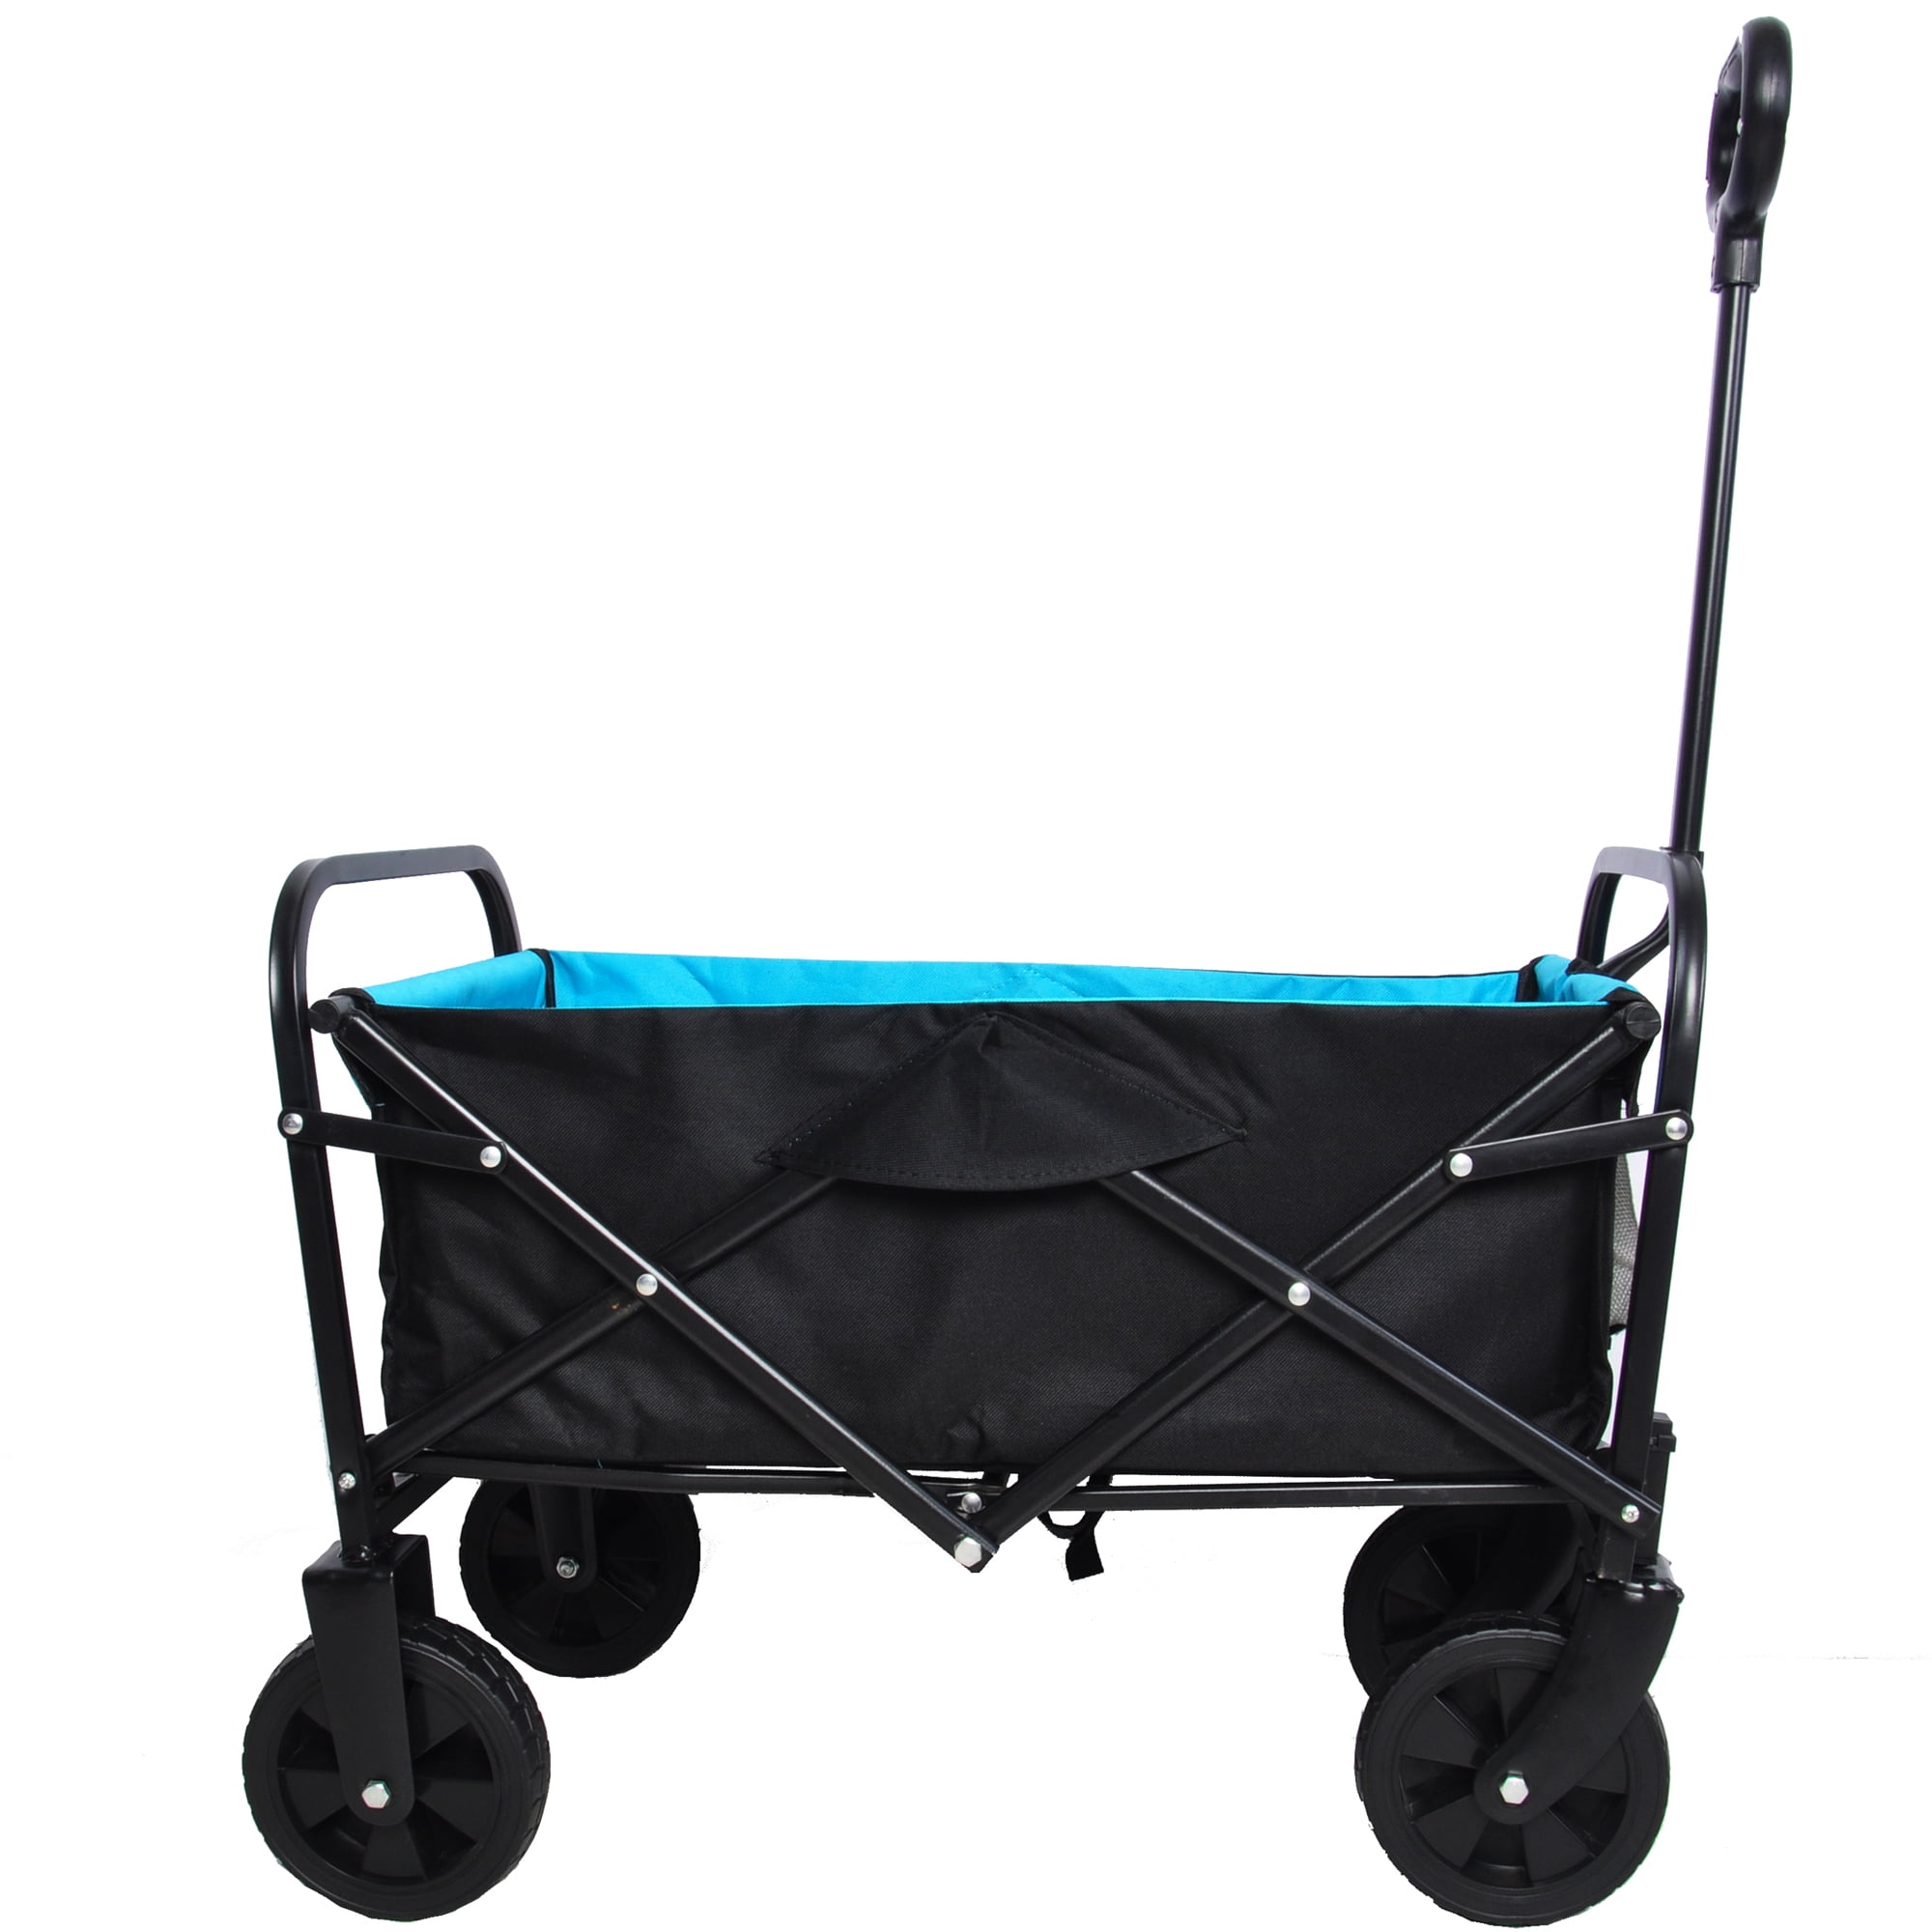 Color: Plaid, Size: 87 31.5 34cm Easy to Carry Convenient Old Cart Portable Folding Lightweight Foldable Wheeled Cart Grocery Cart Picnic Beach 